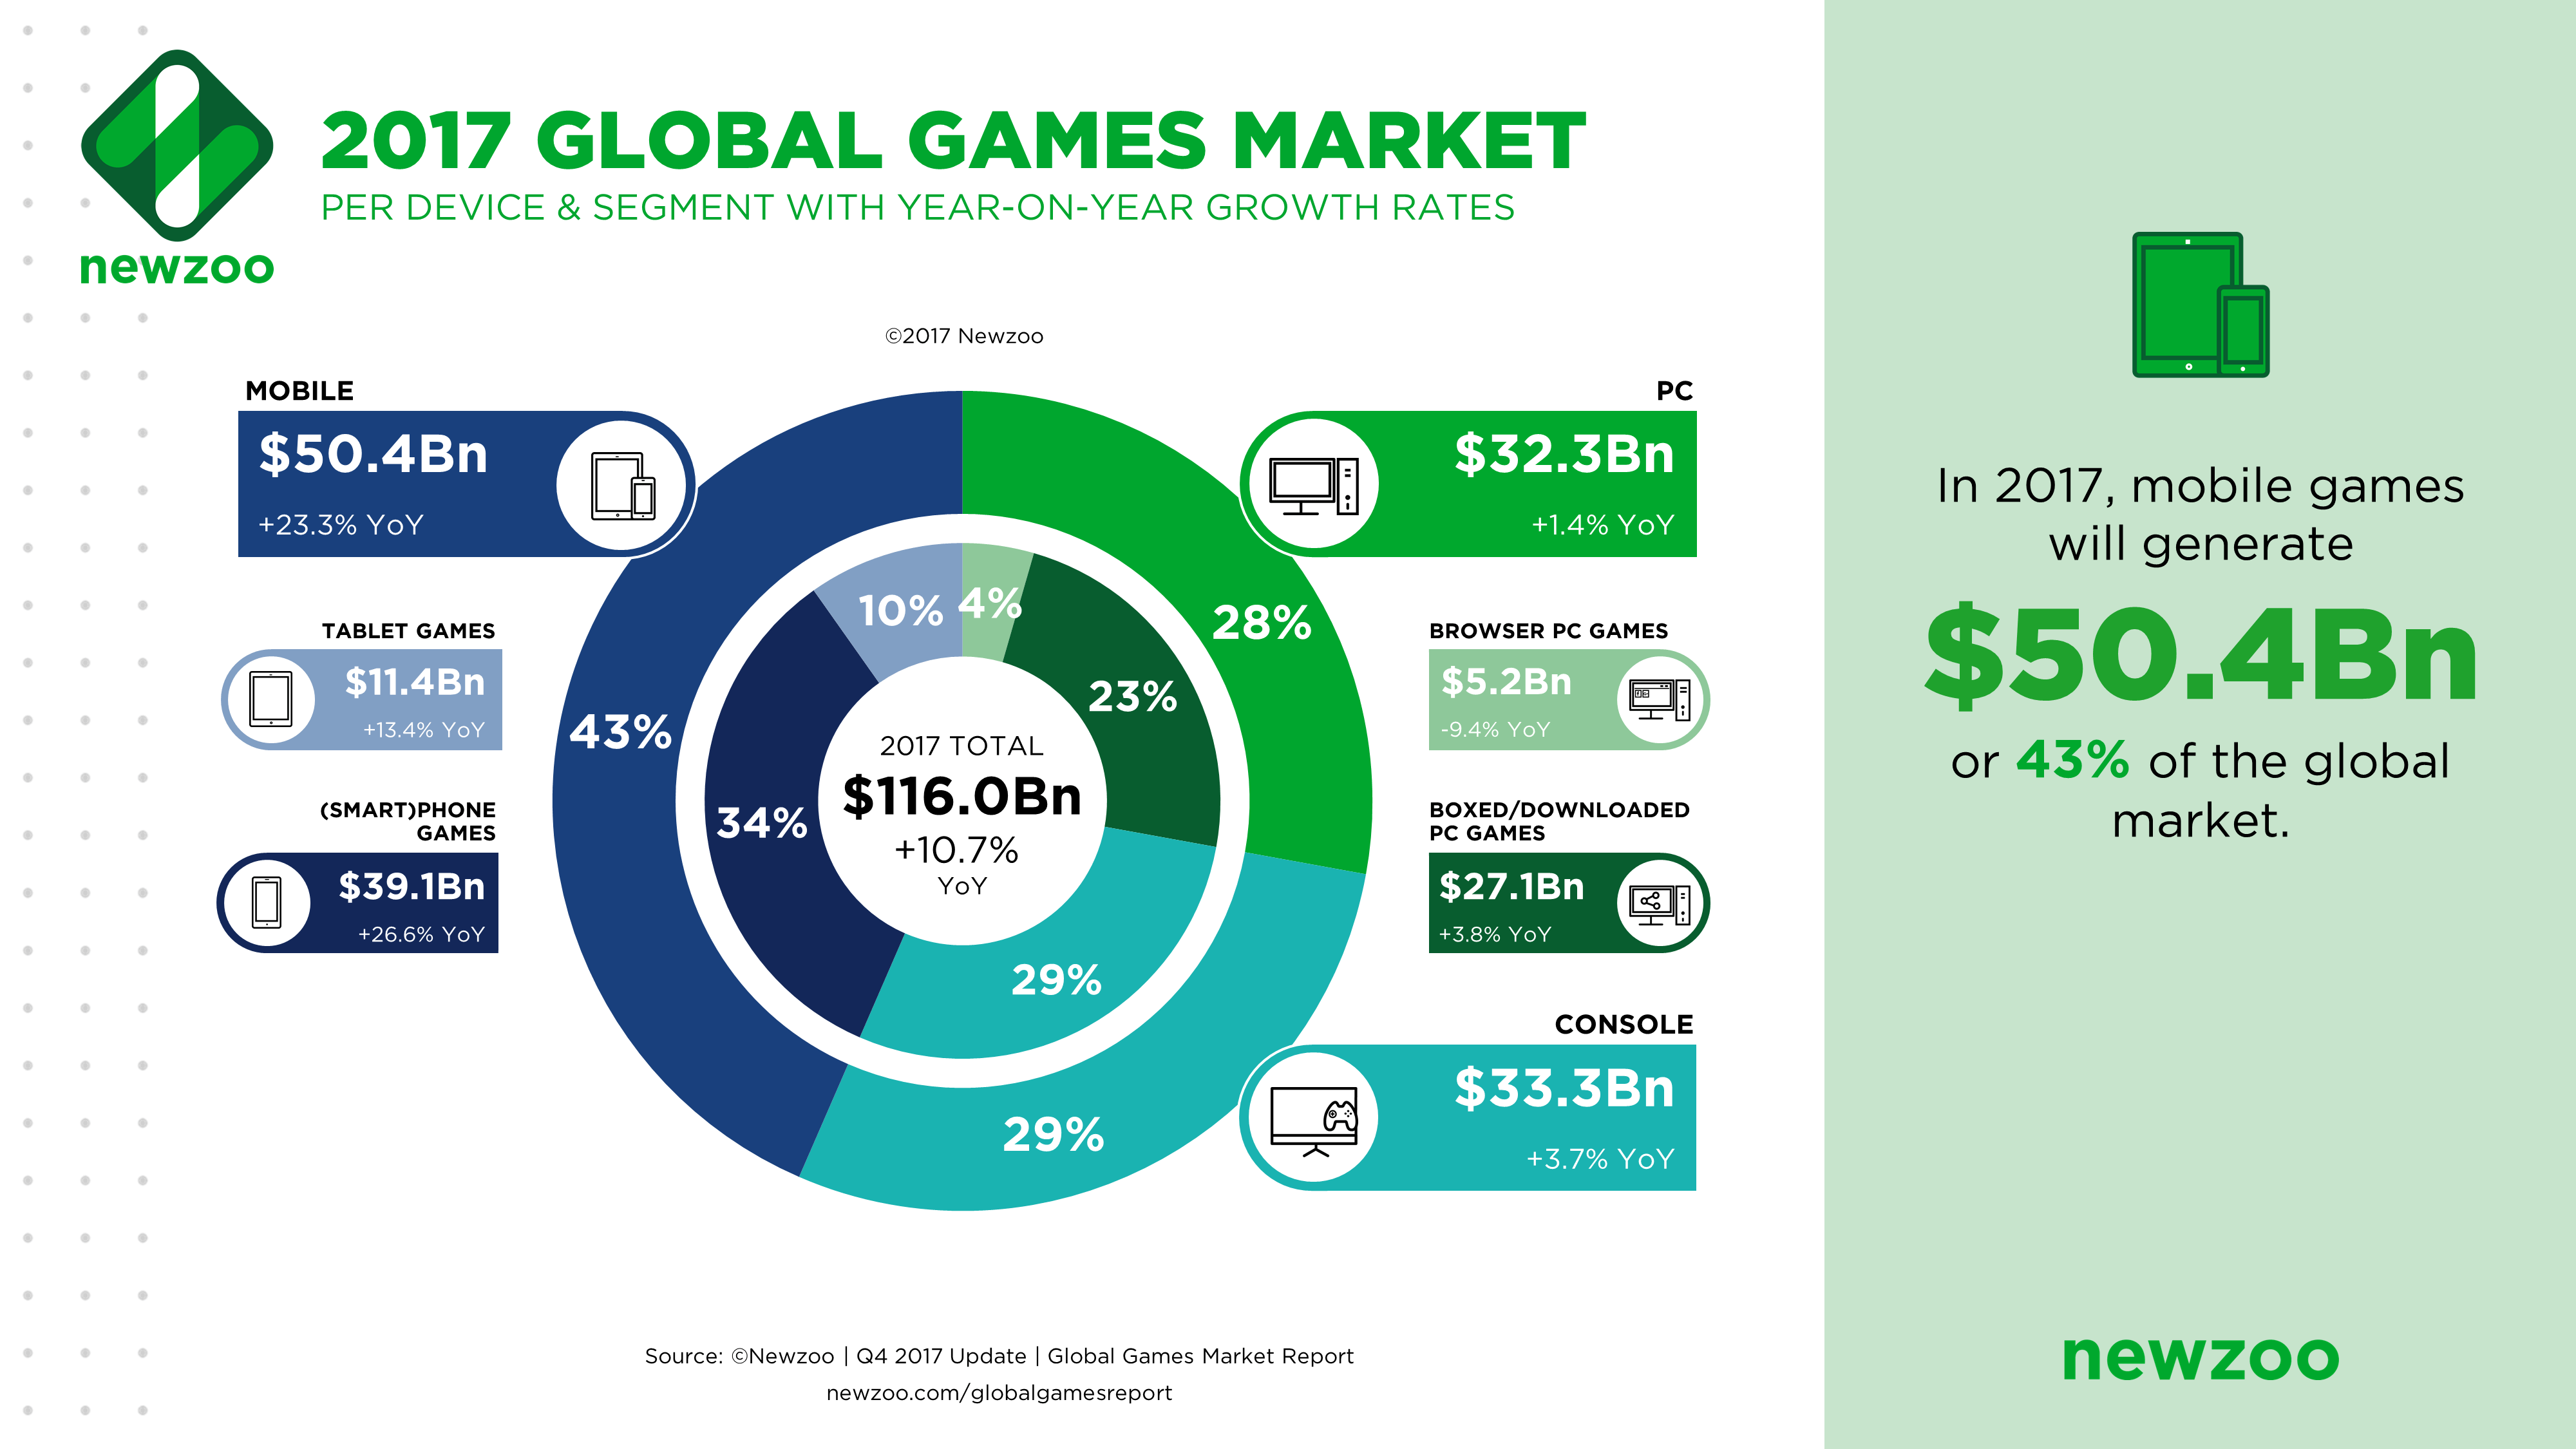 Games as business